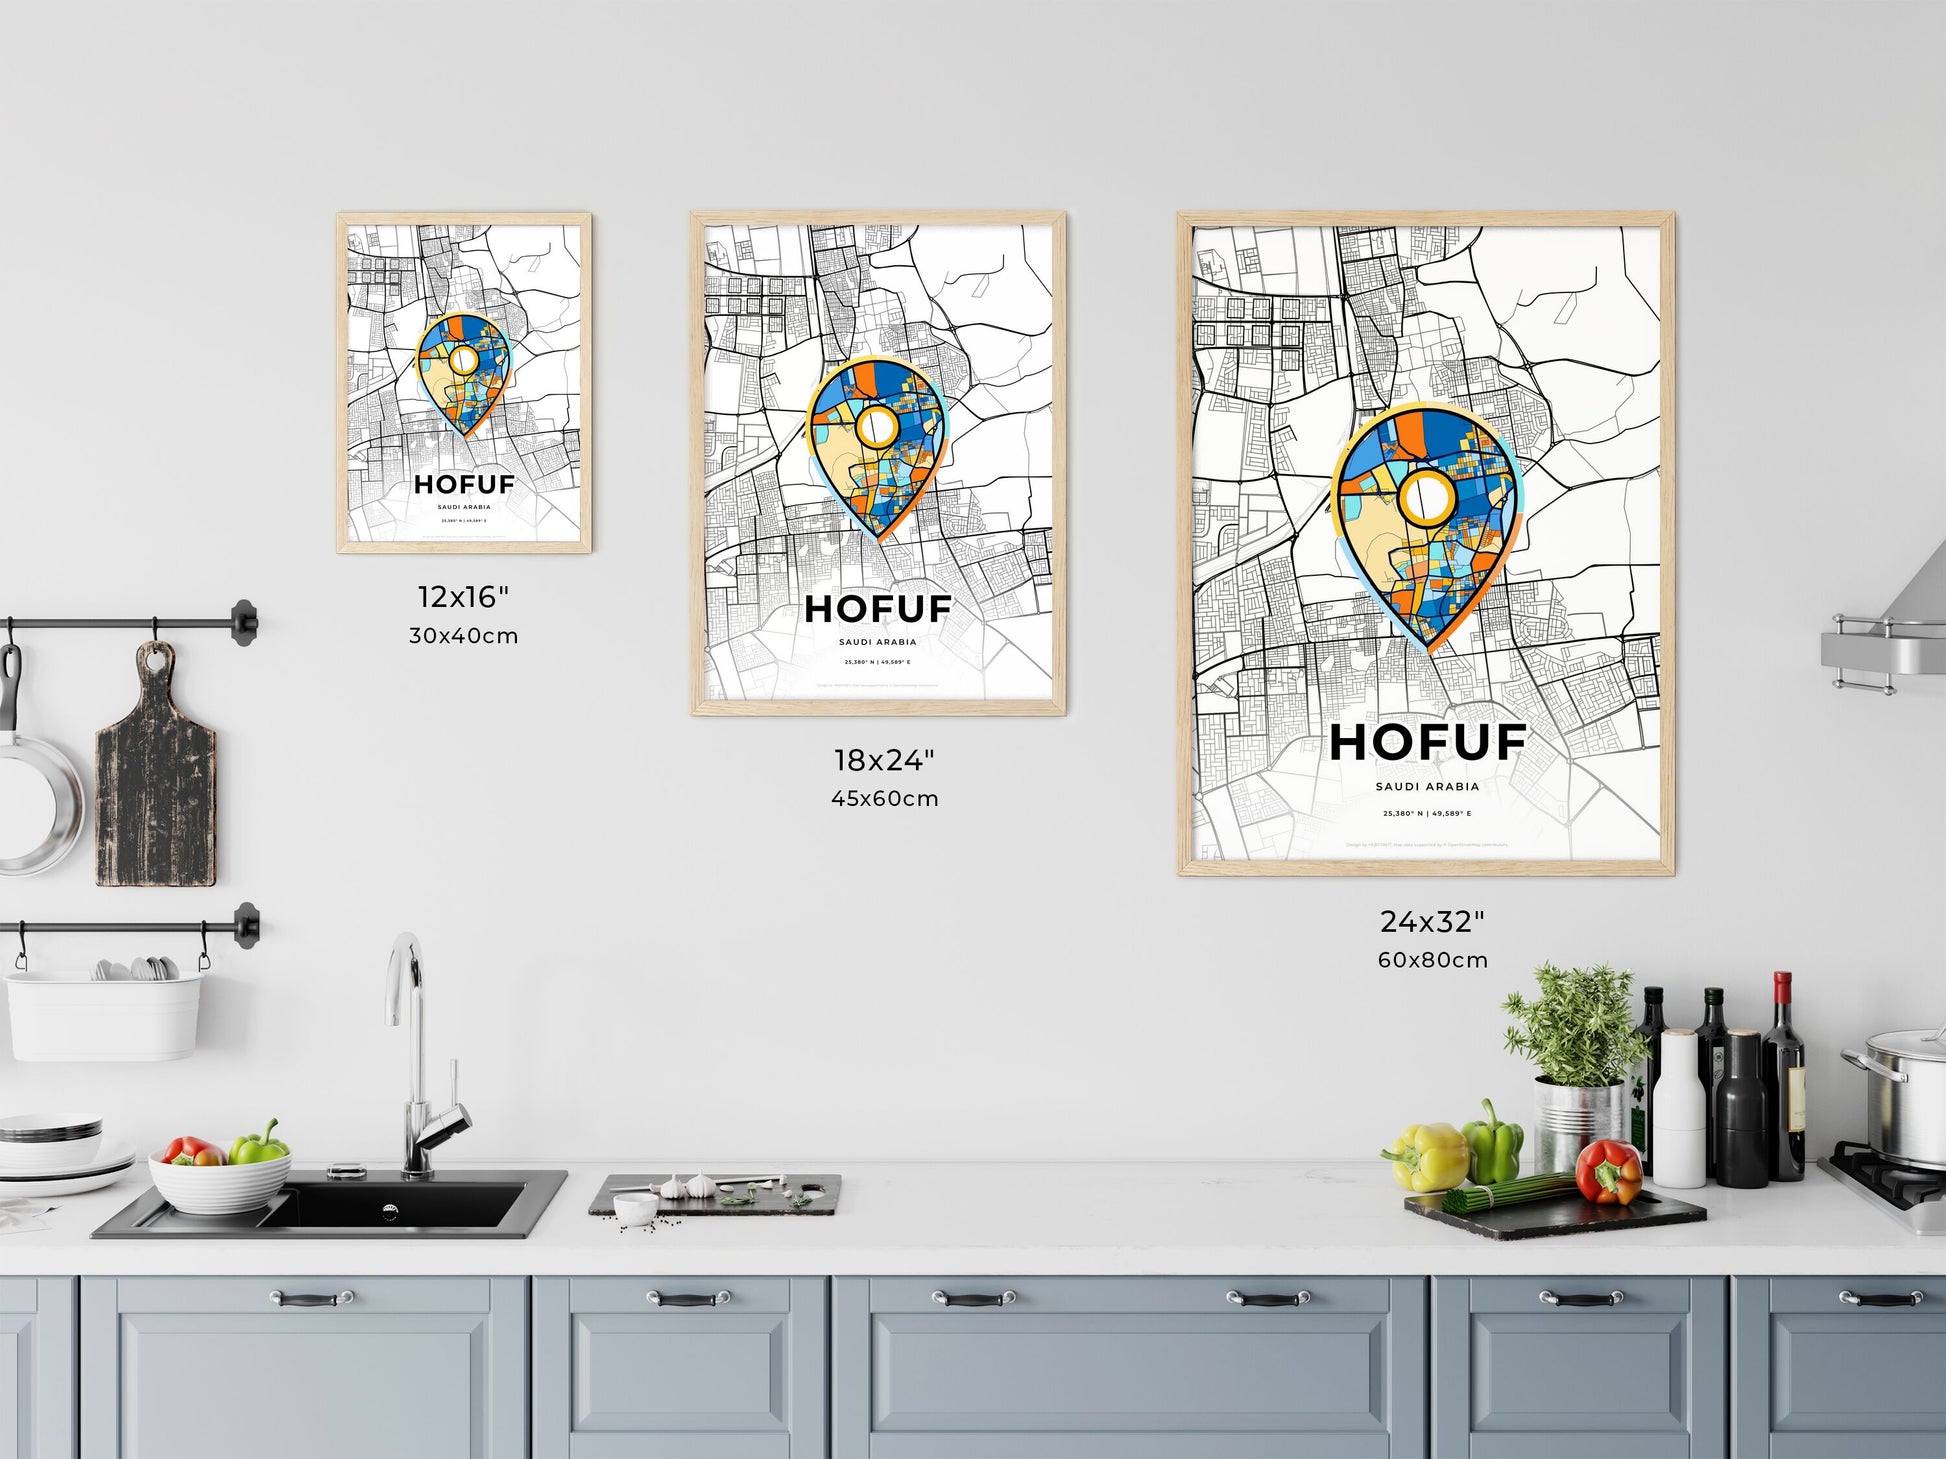 HOFUF SAUDI ARABIA minimal art map with a colorful icon. Where it all began, Couple map gift.